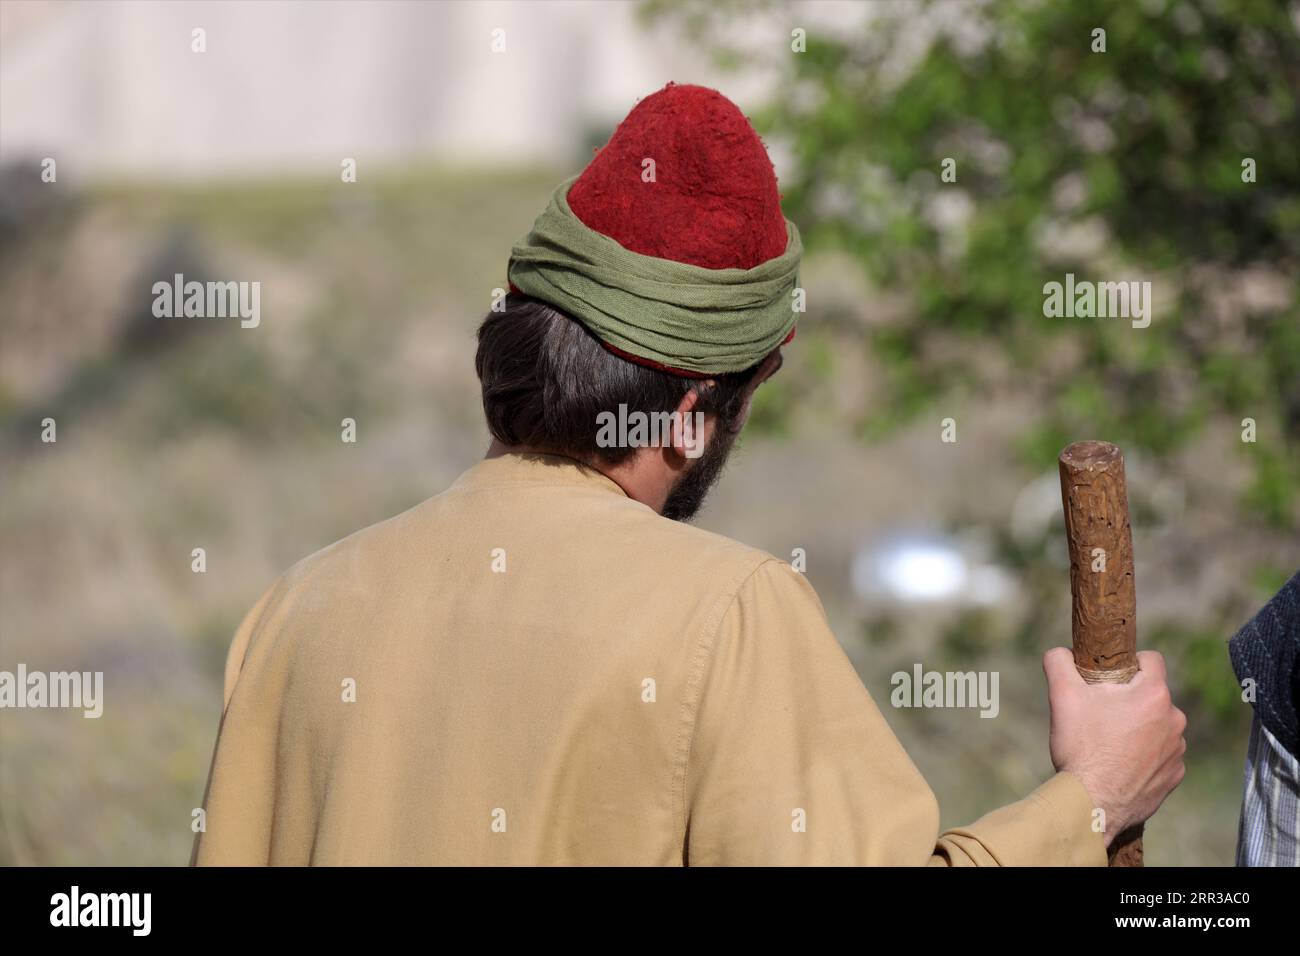 A Turkish young man in traditional clothing. Rear view of a young man walking in nature. Stock Photo